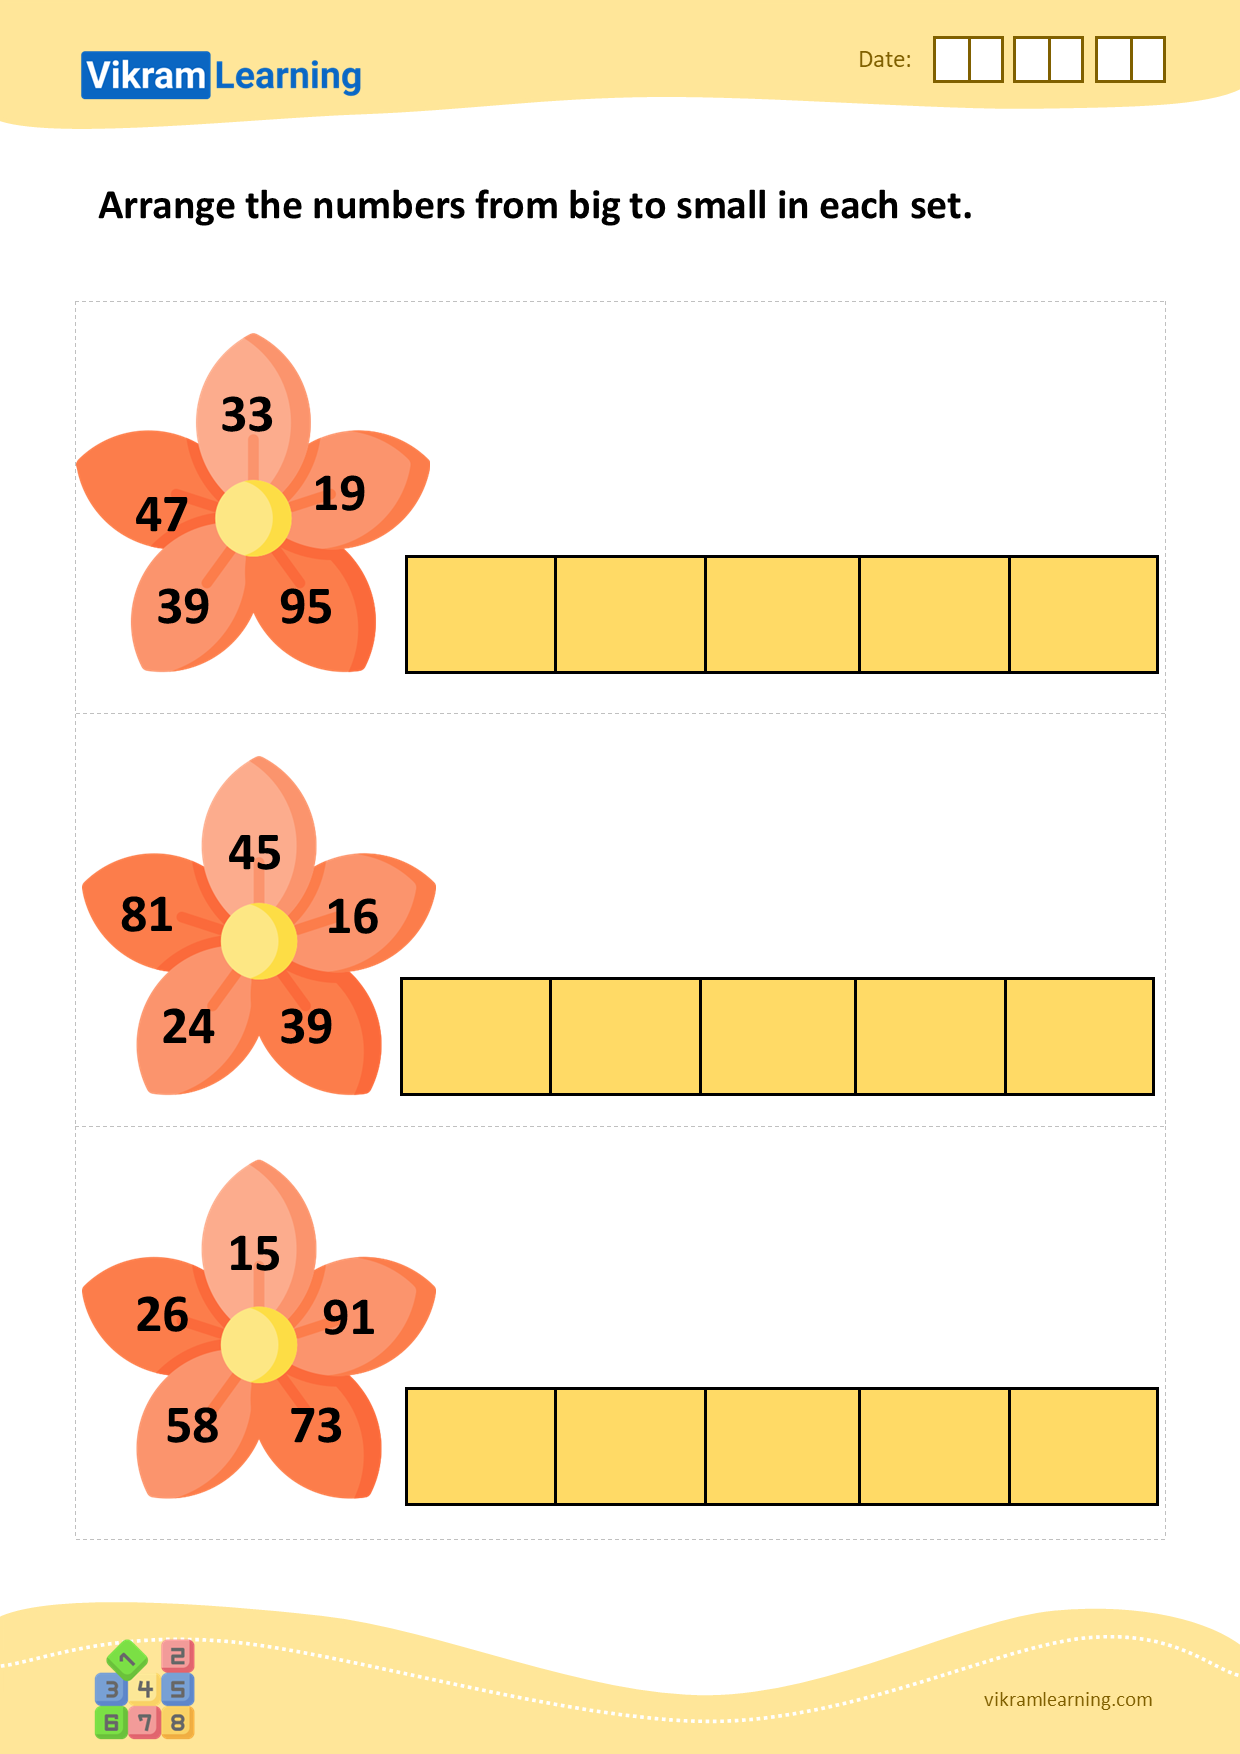 download-arrange-the-numbers-from-big-to-small-in-each-set-worksheets-vikramlearning